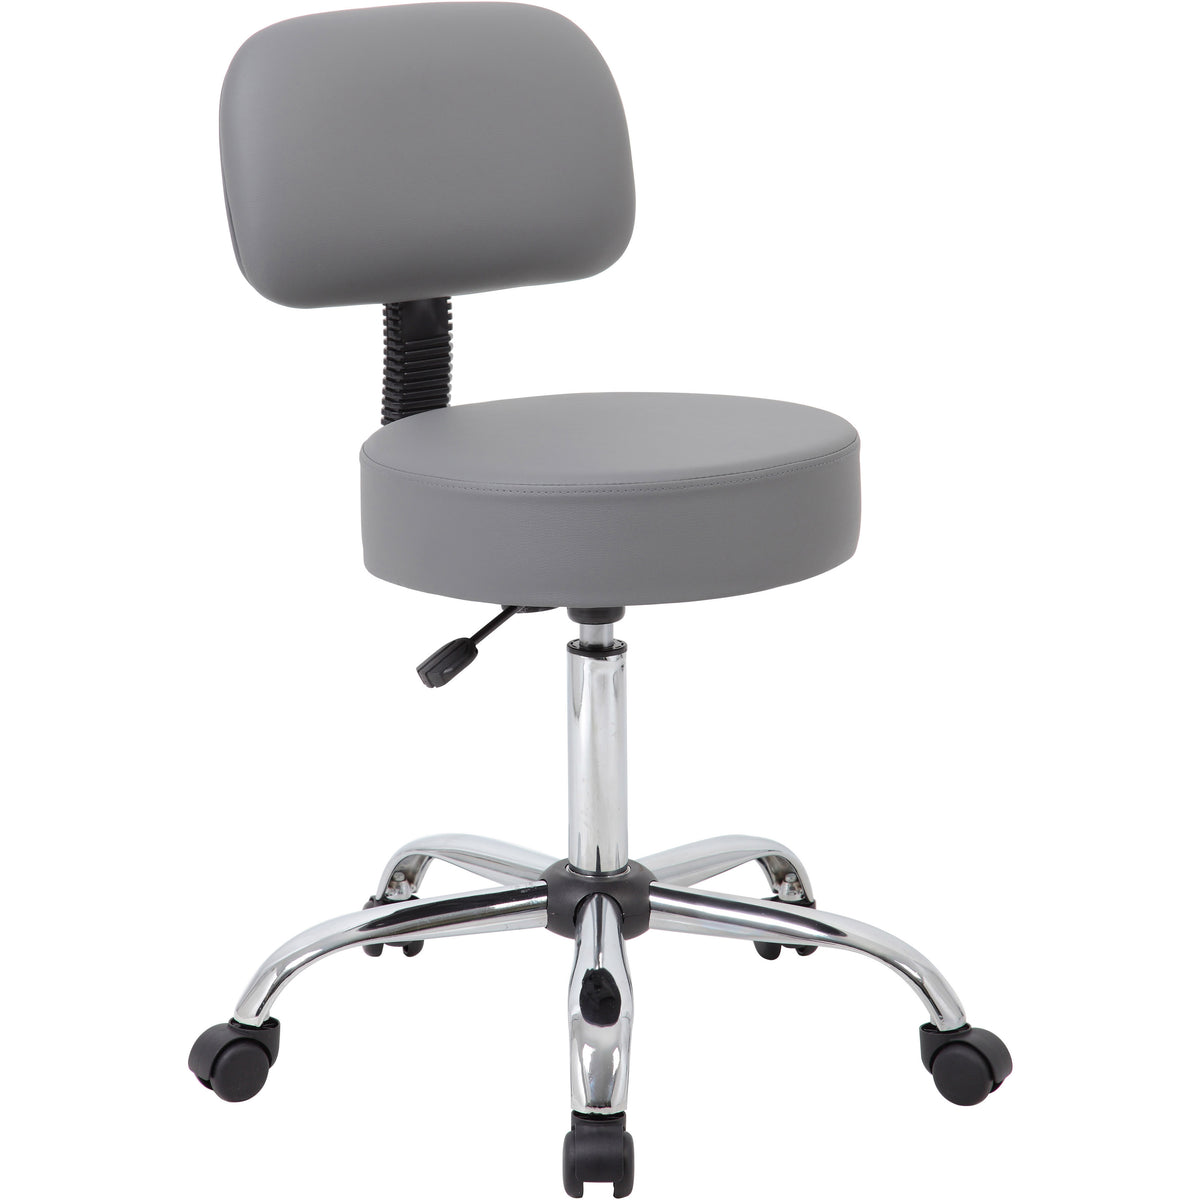 Grey Antimicrobial Medical Stool with Back Cushion, B245-GY